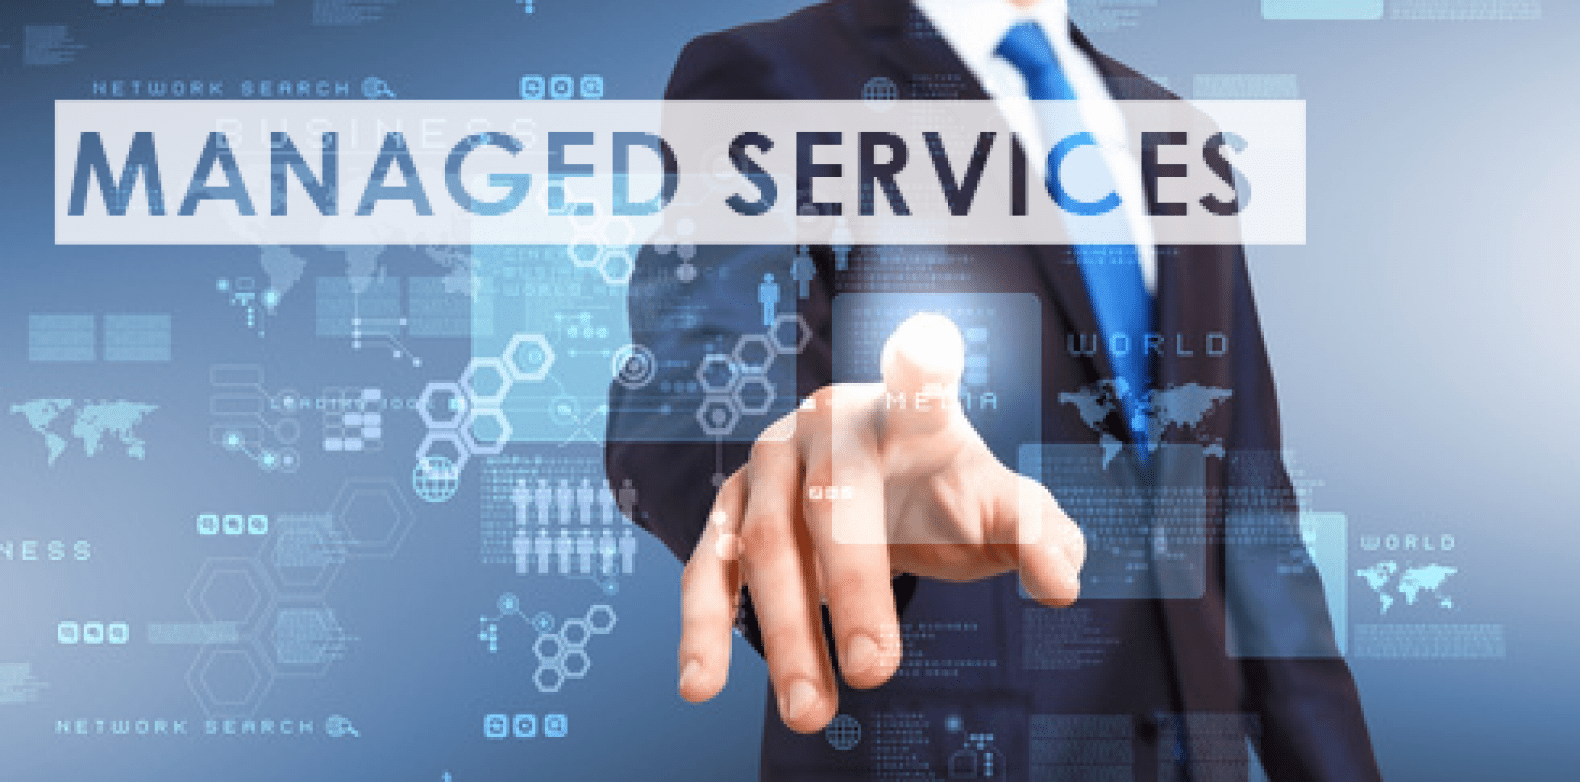 PEI's managed Services